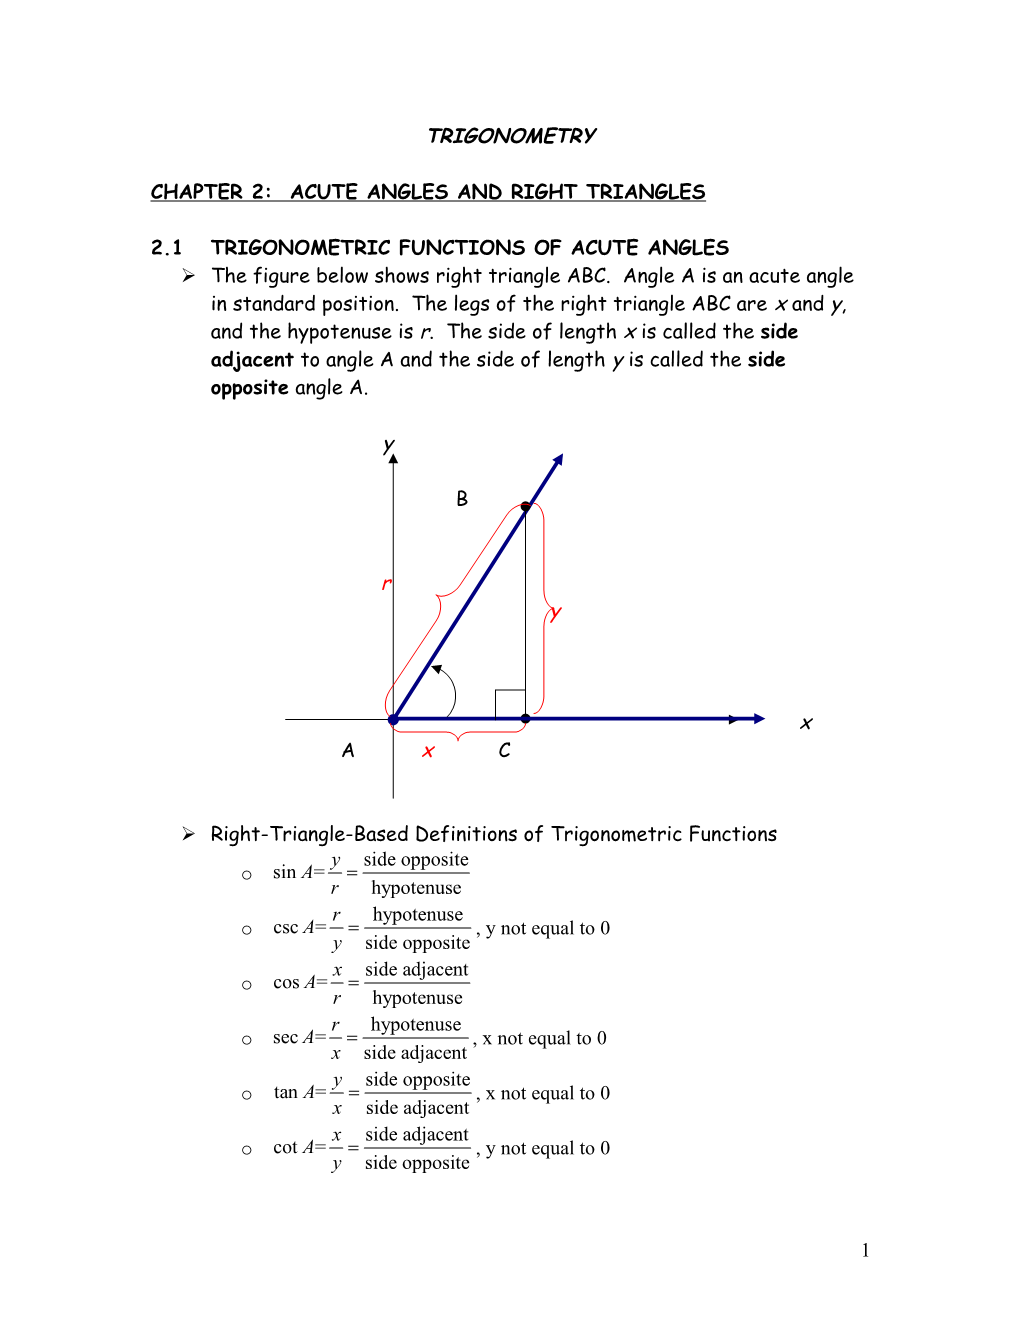 Chapter 2: Acute Angles and Right Triangles